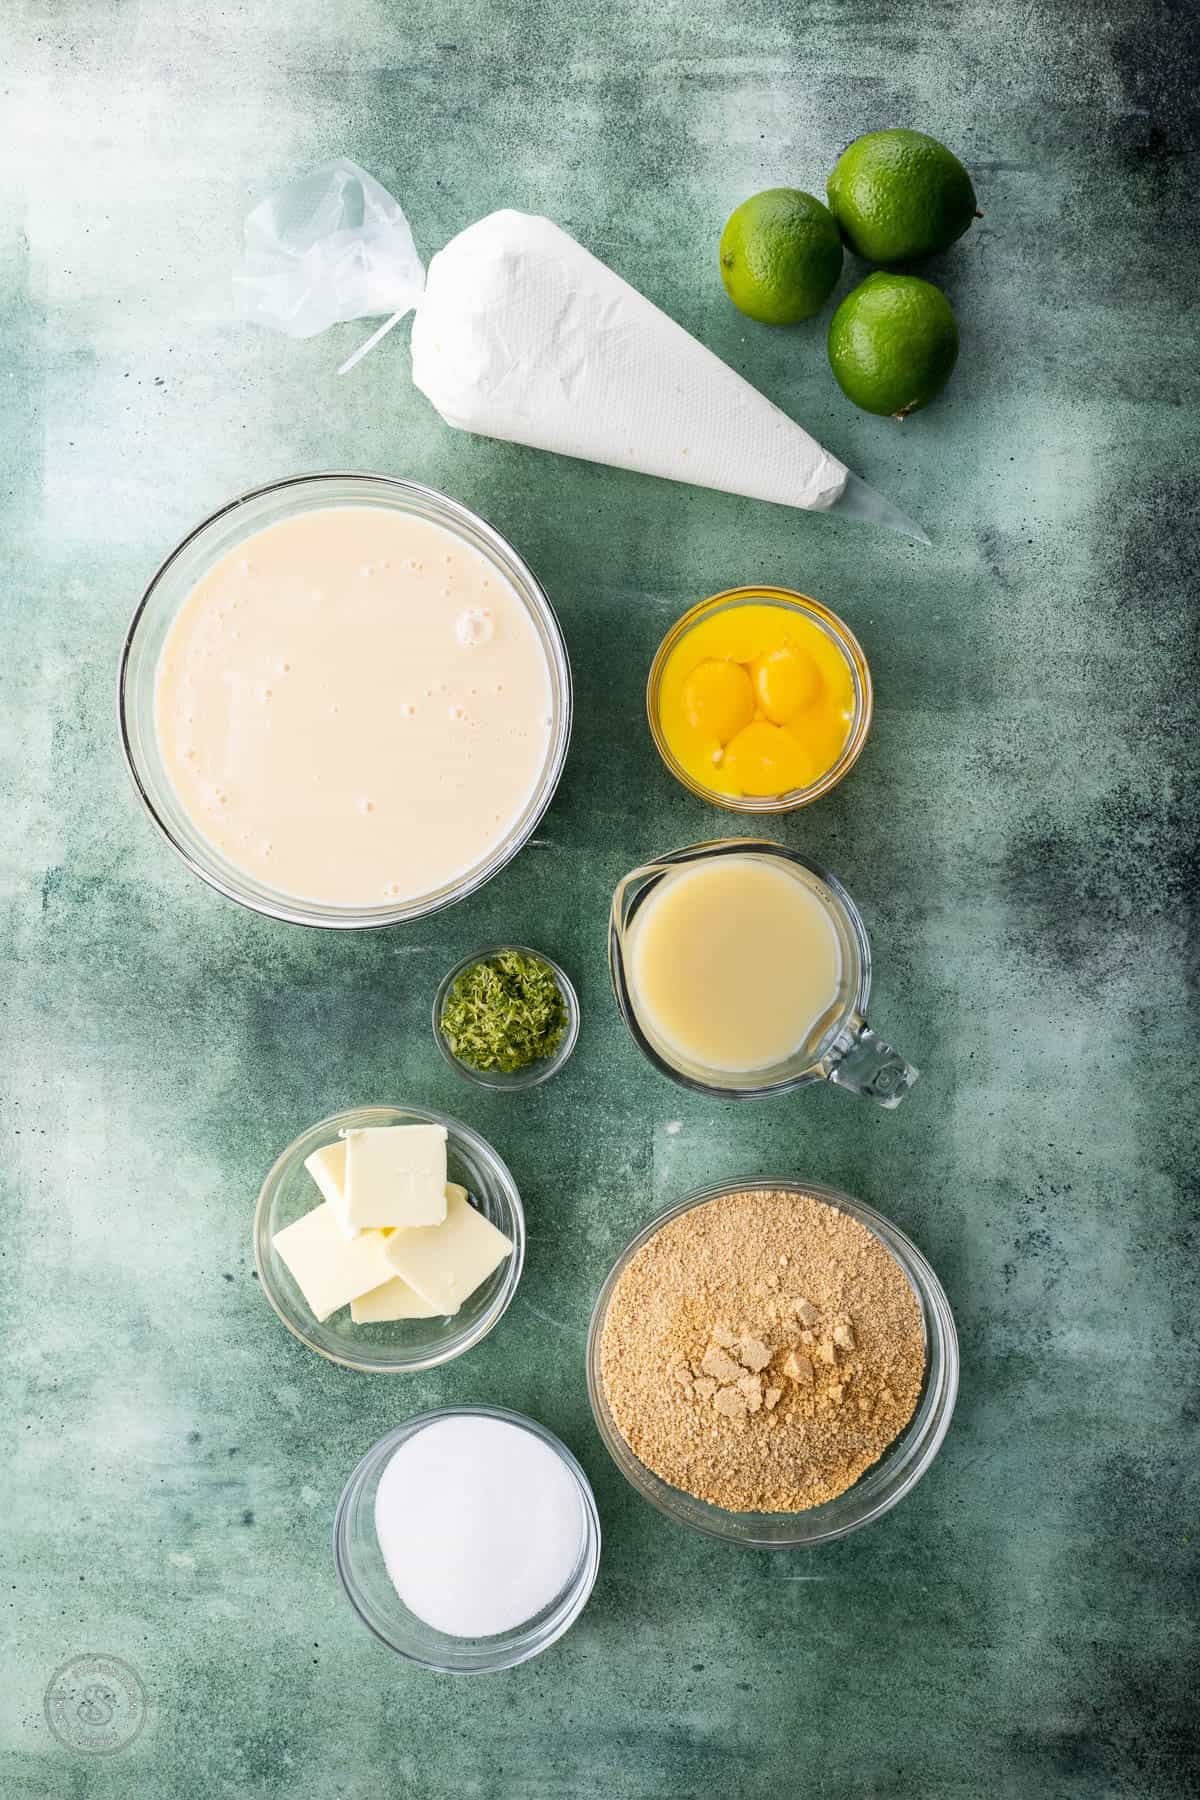 Ingredients for key lime pie on a greenish surface